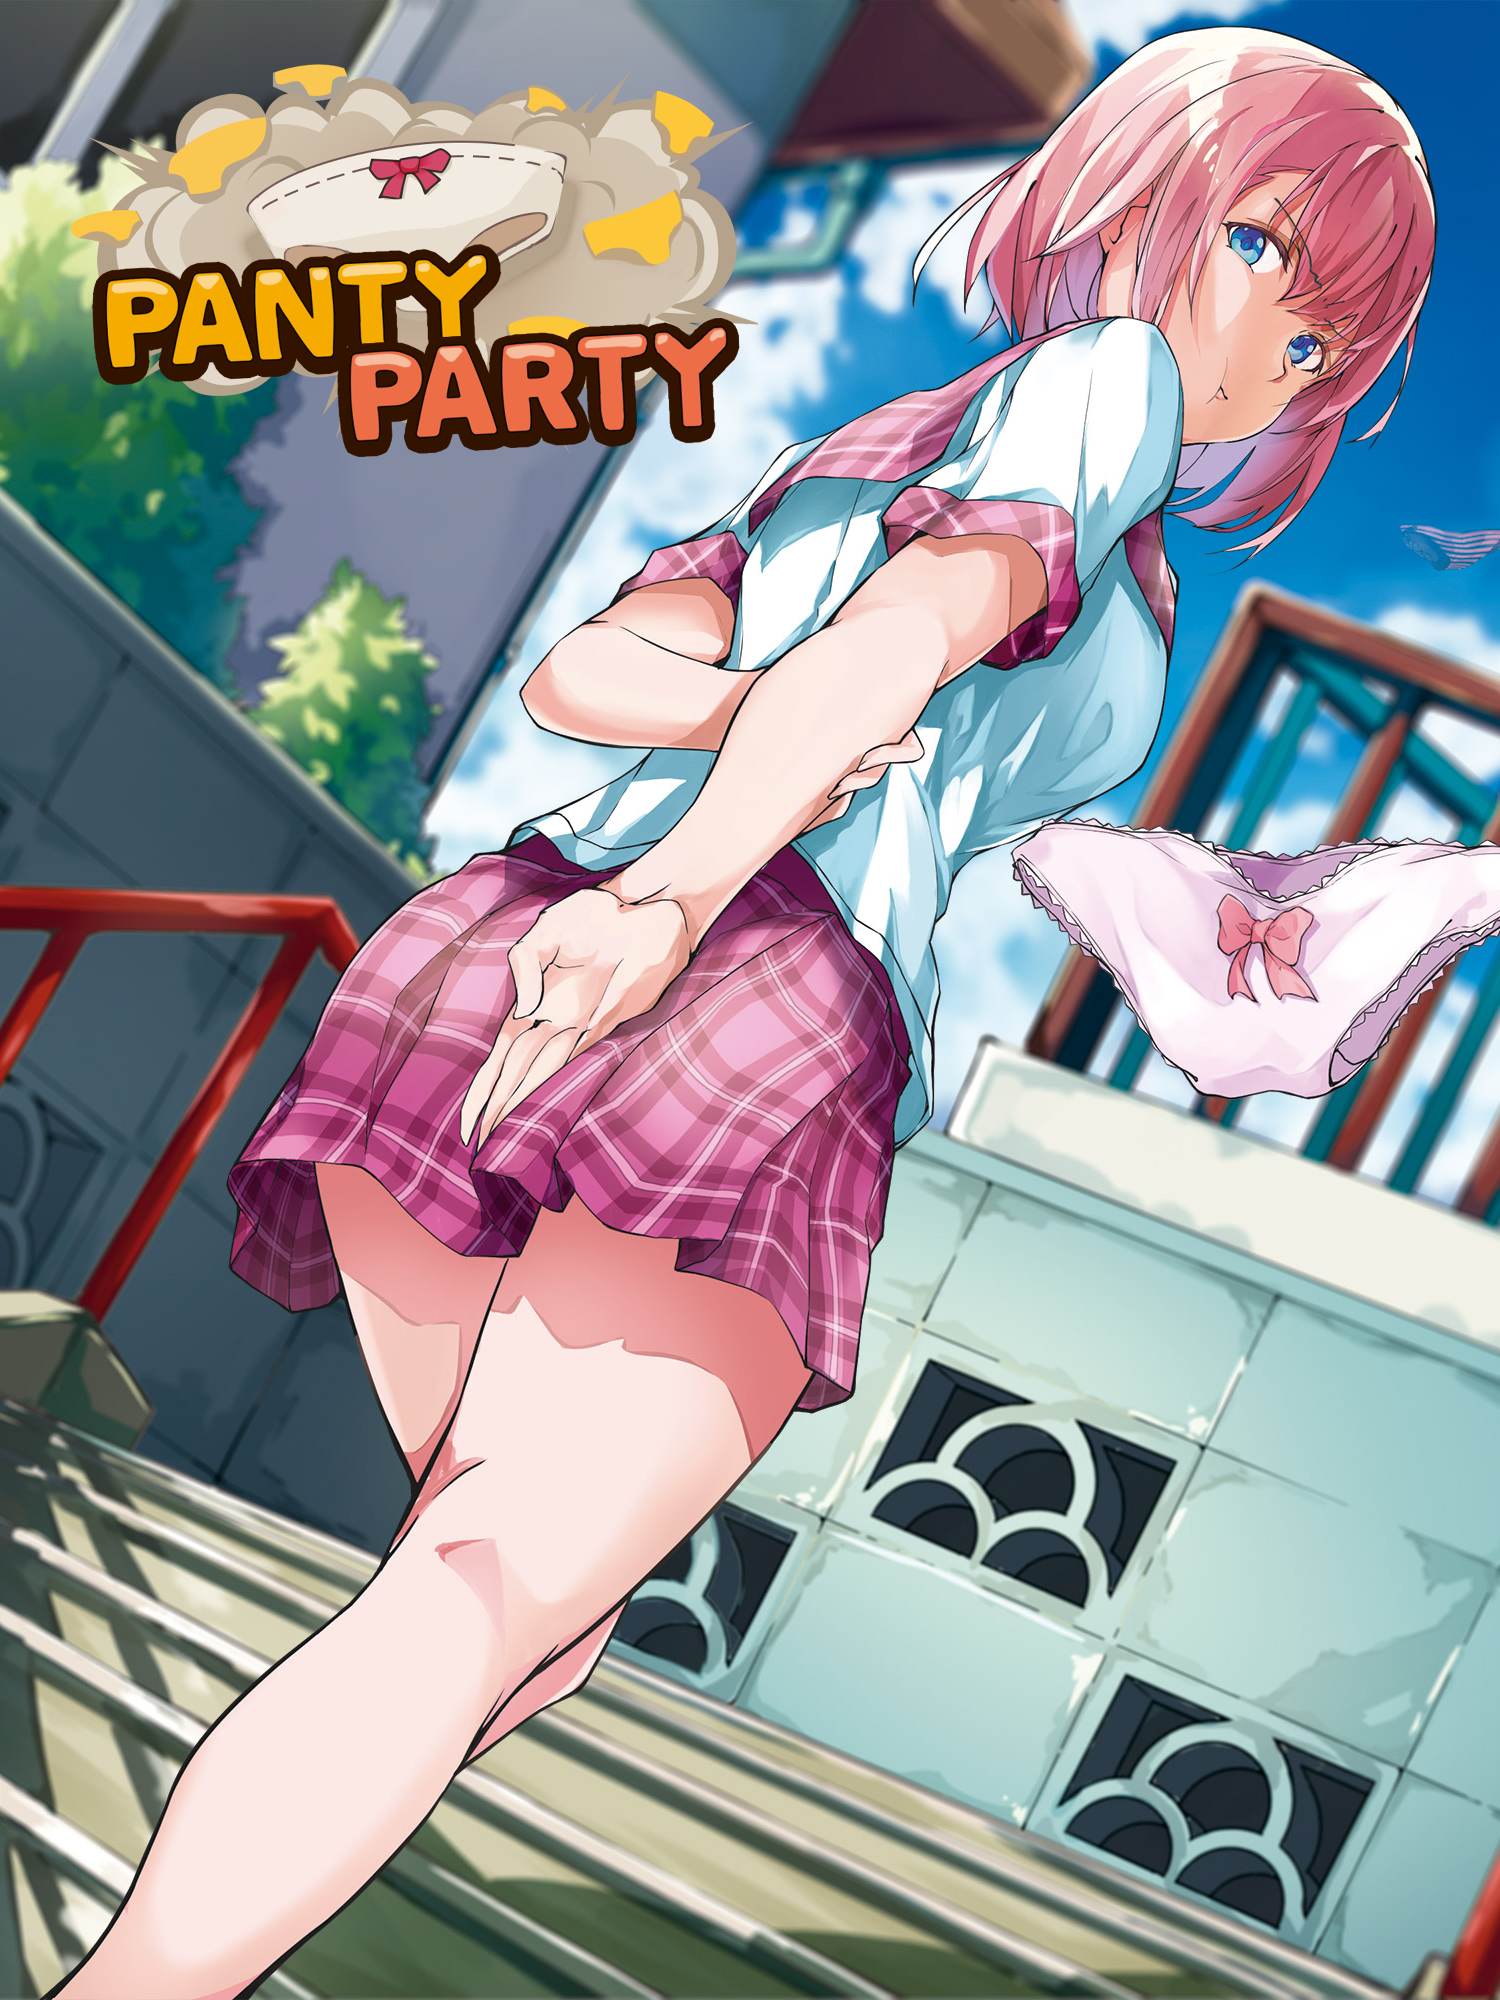 Panty Party screenshots, images and pictures - Giant Bomb